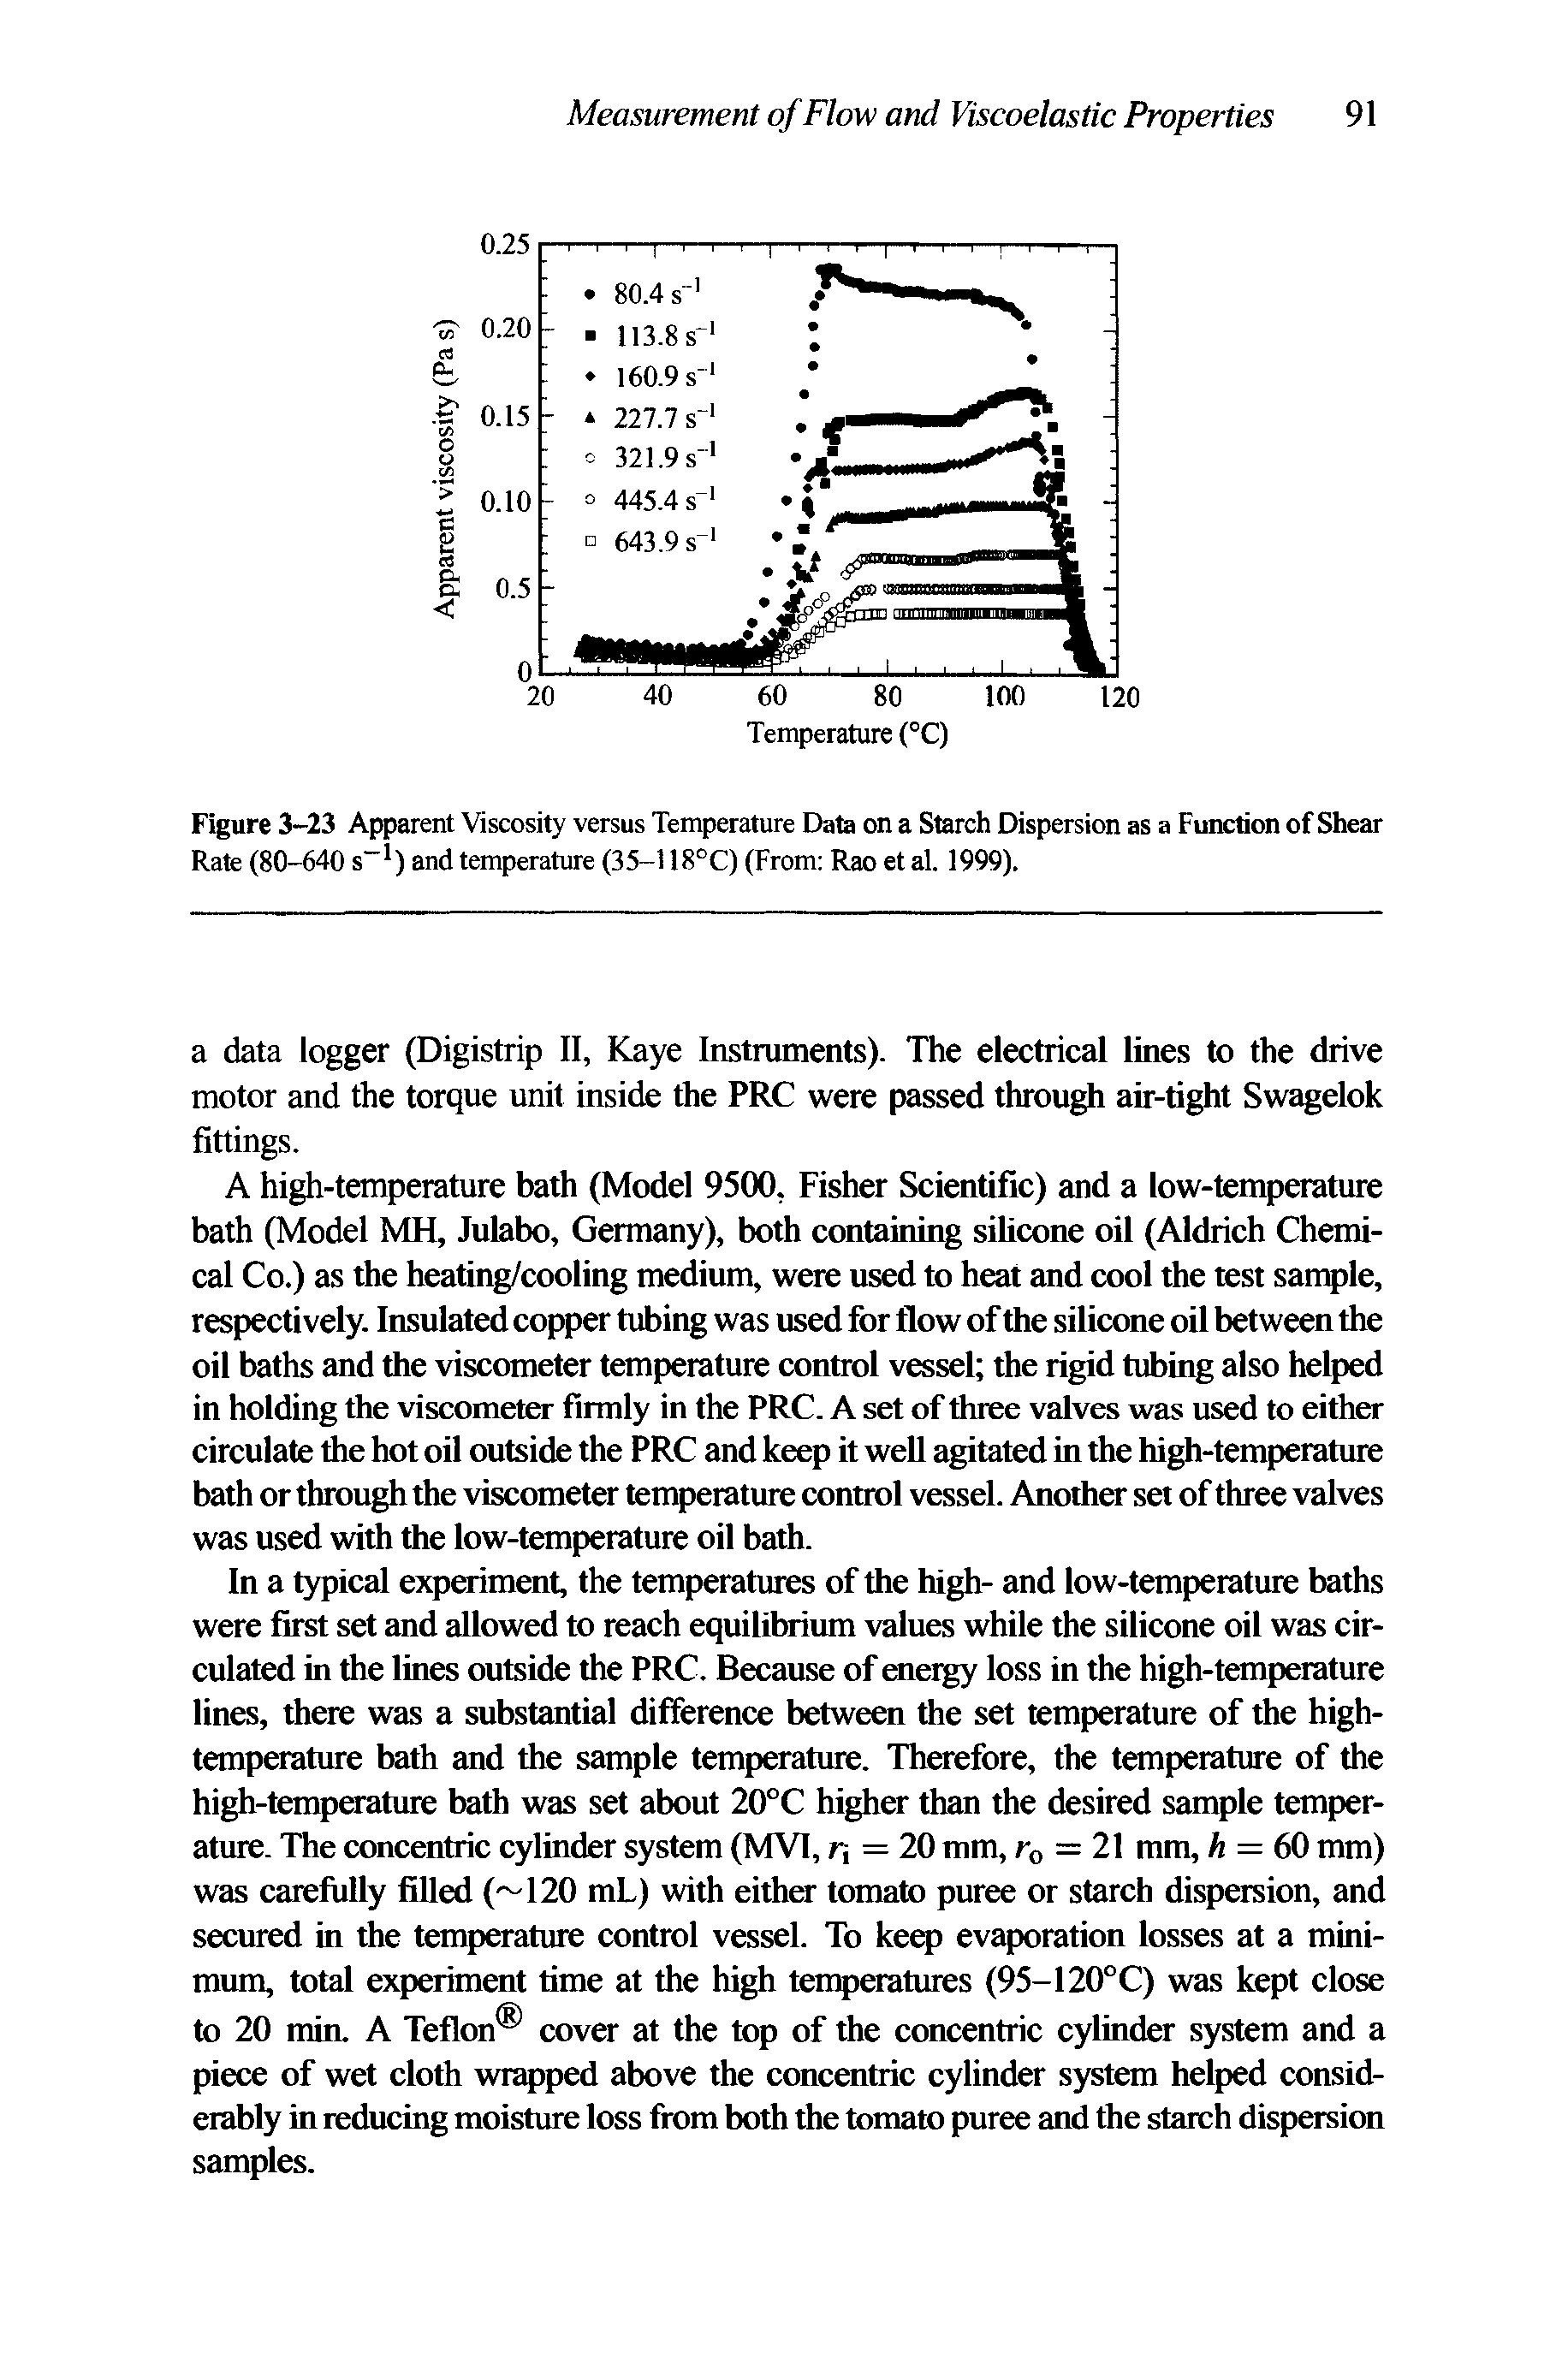 Figure 3-23 Apparent Viscosity versus Temperature Data on a Starch Dispersion as a Function of Shear Rate (80-640 s ) and temperature (35-118°C) (From Rao et al. 1999).